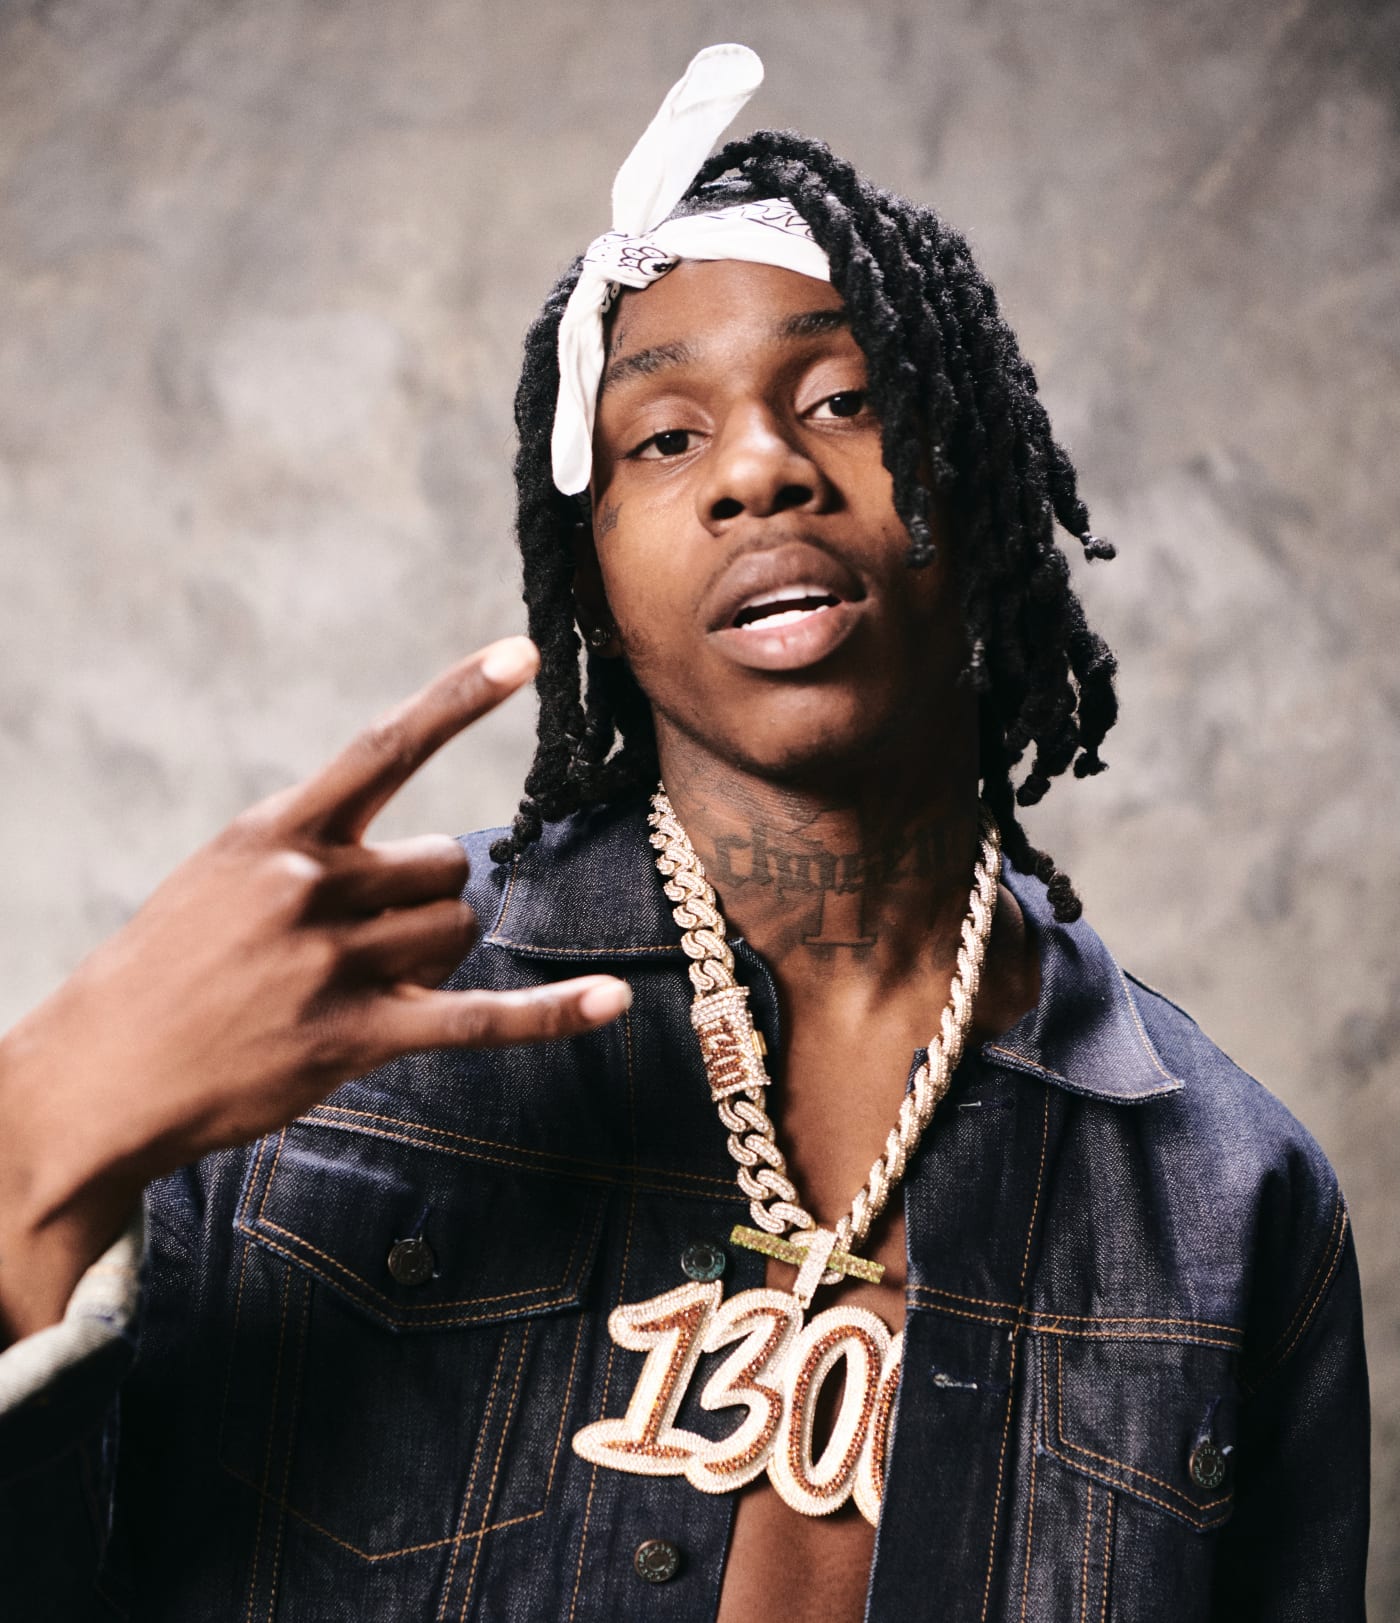 Polo G’s mom says he did not attend Private school 25